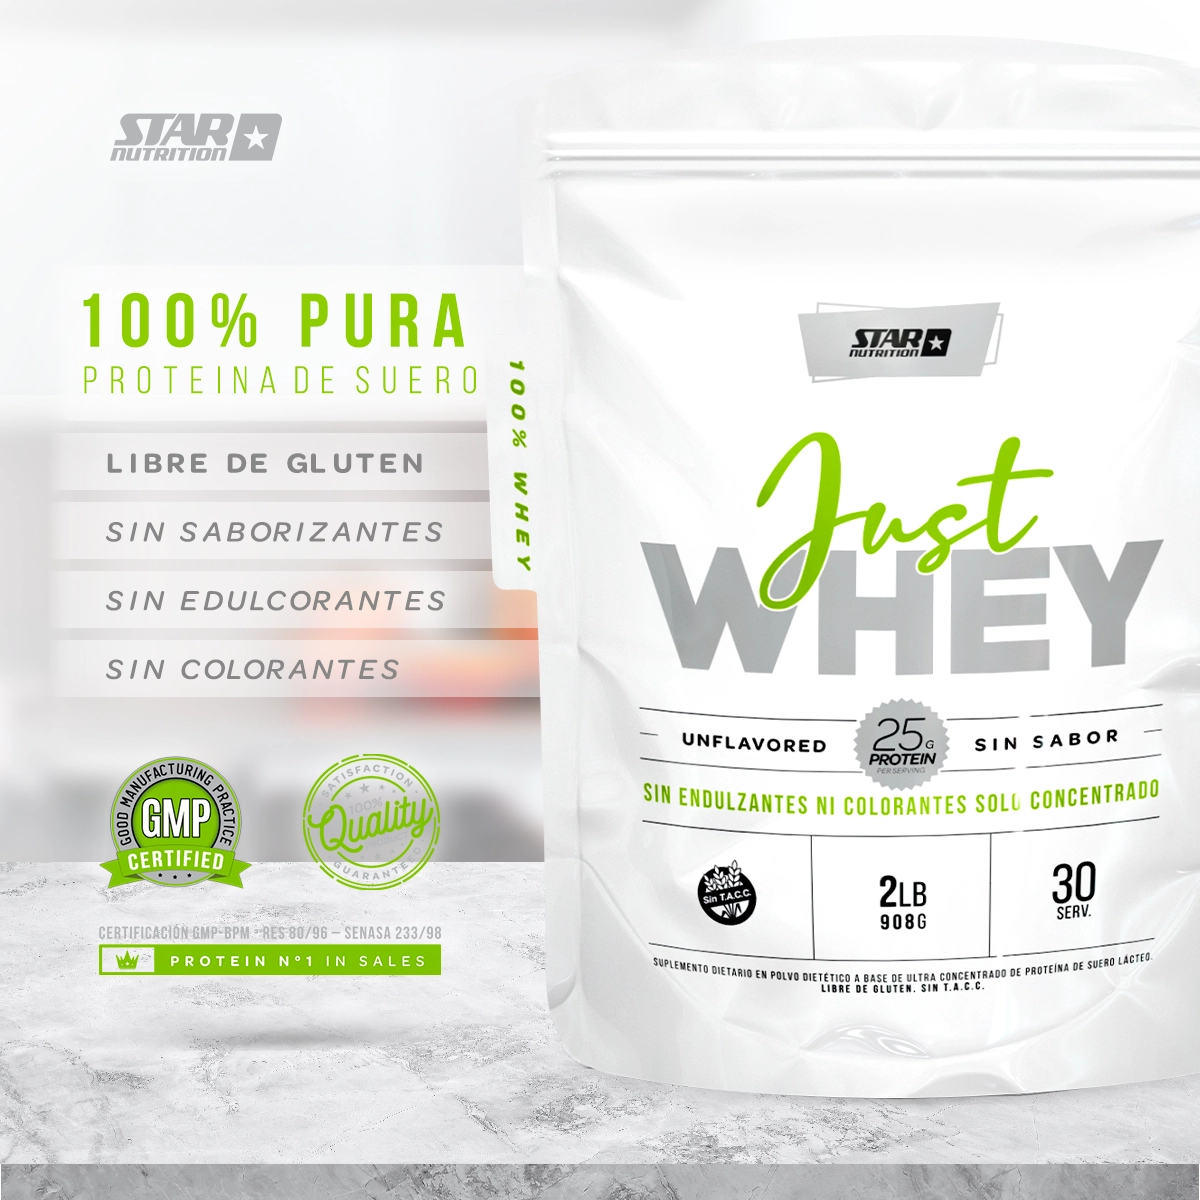 JUST WHEY PROTEIN